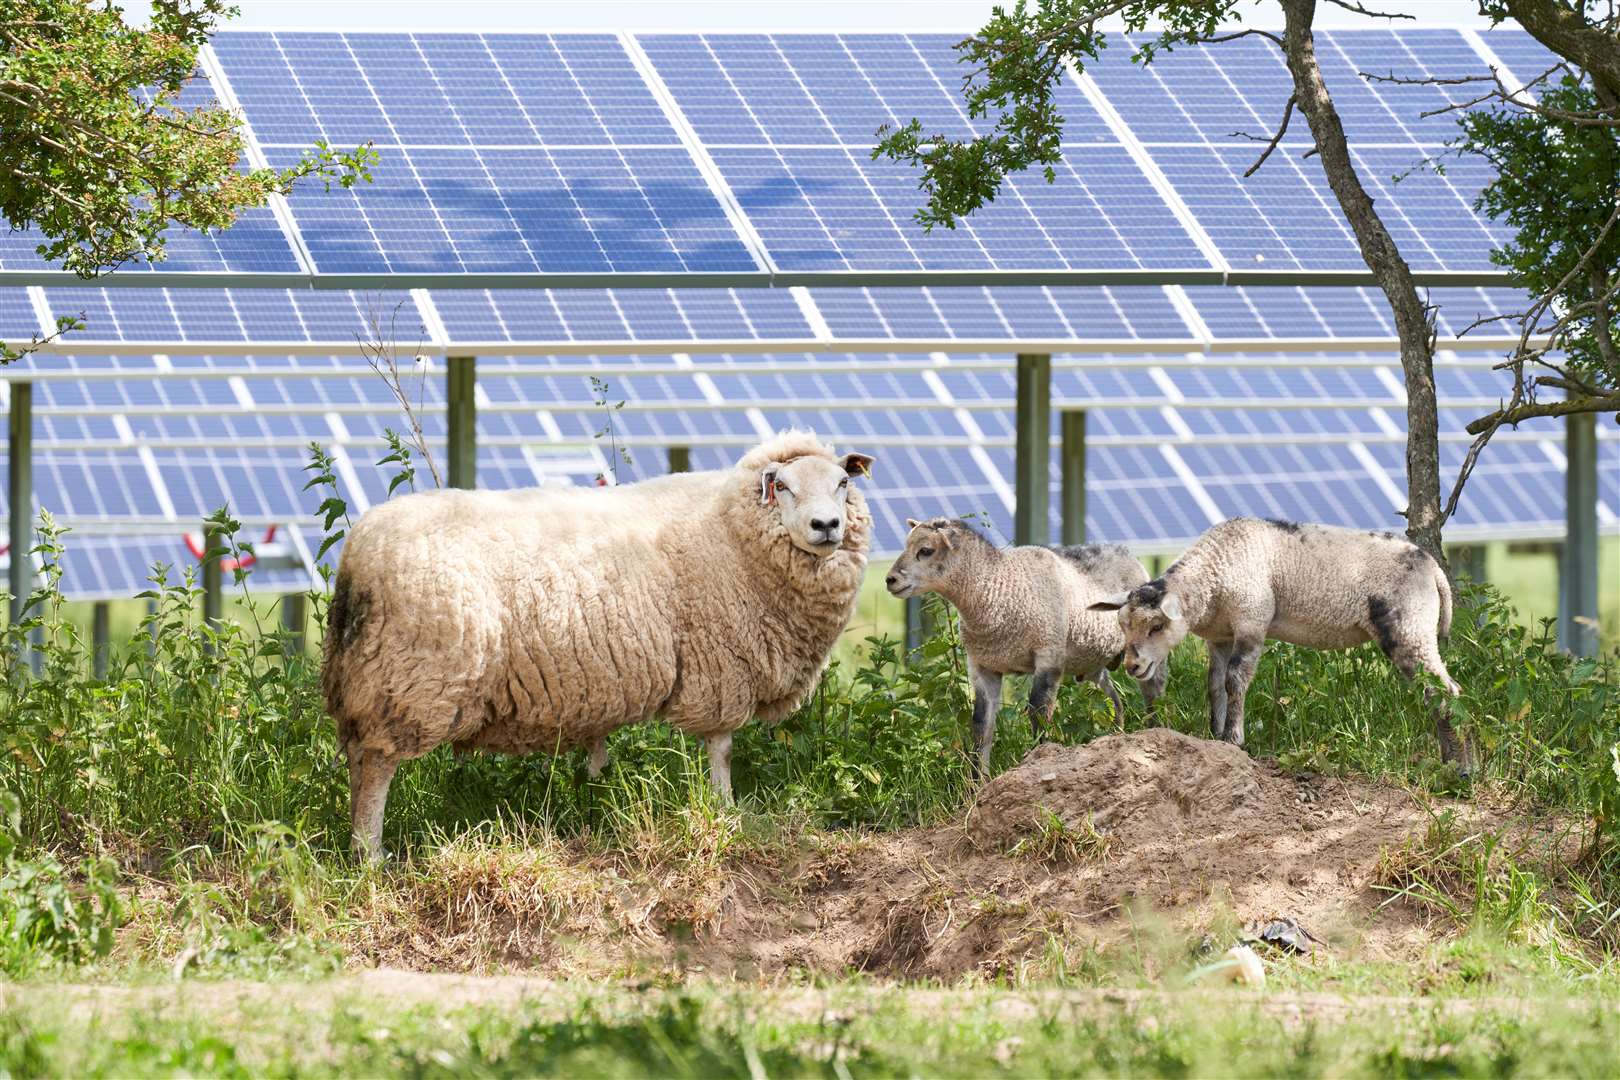 Sheep grazing around the solar panels on one of Renewable Connections existing solar farms